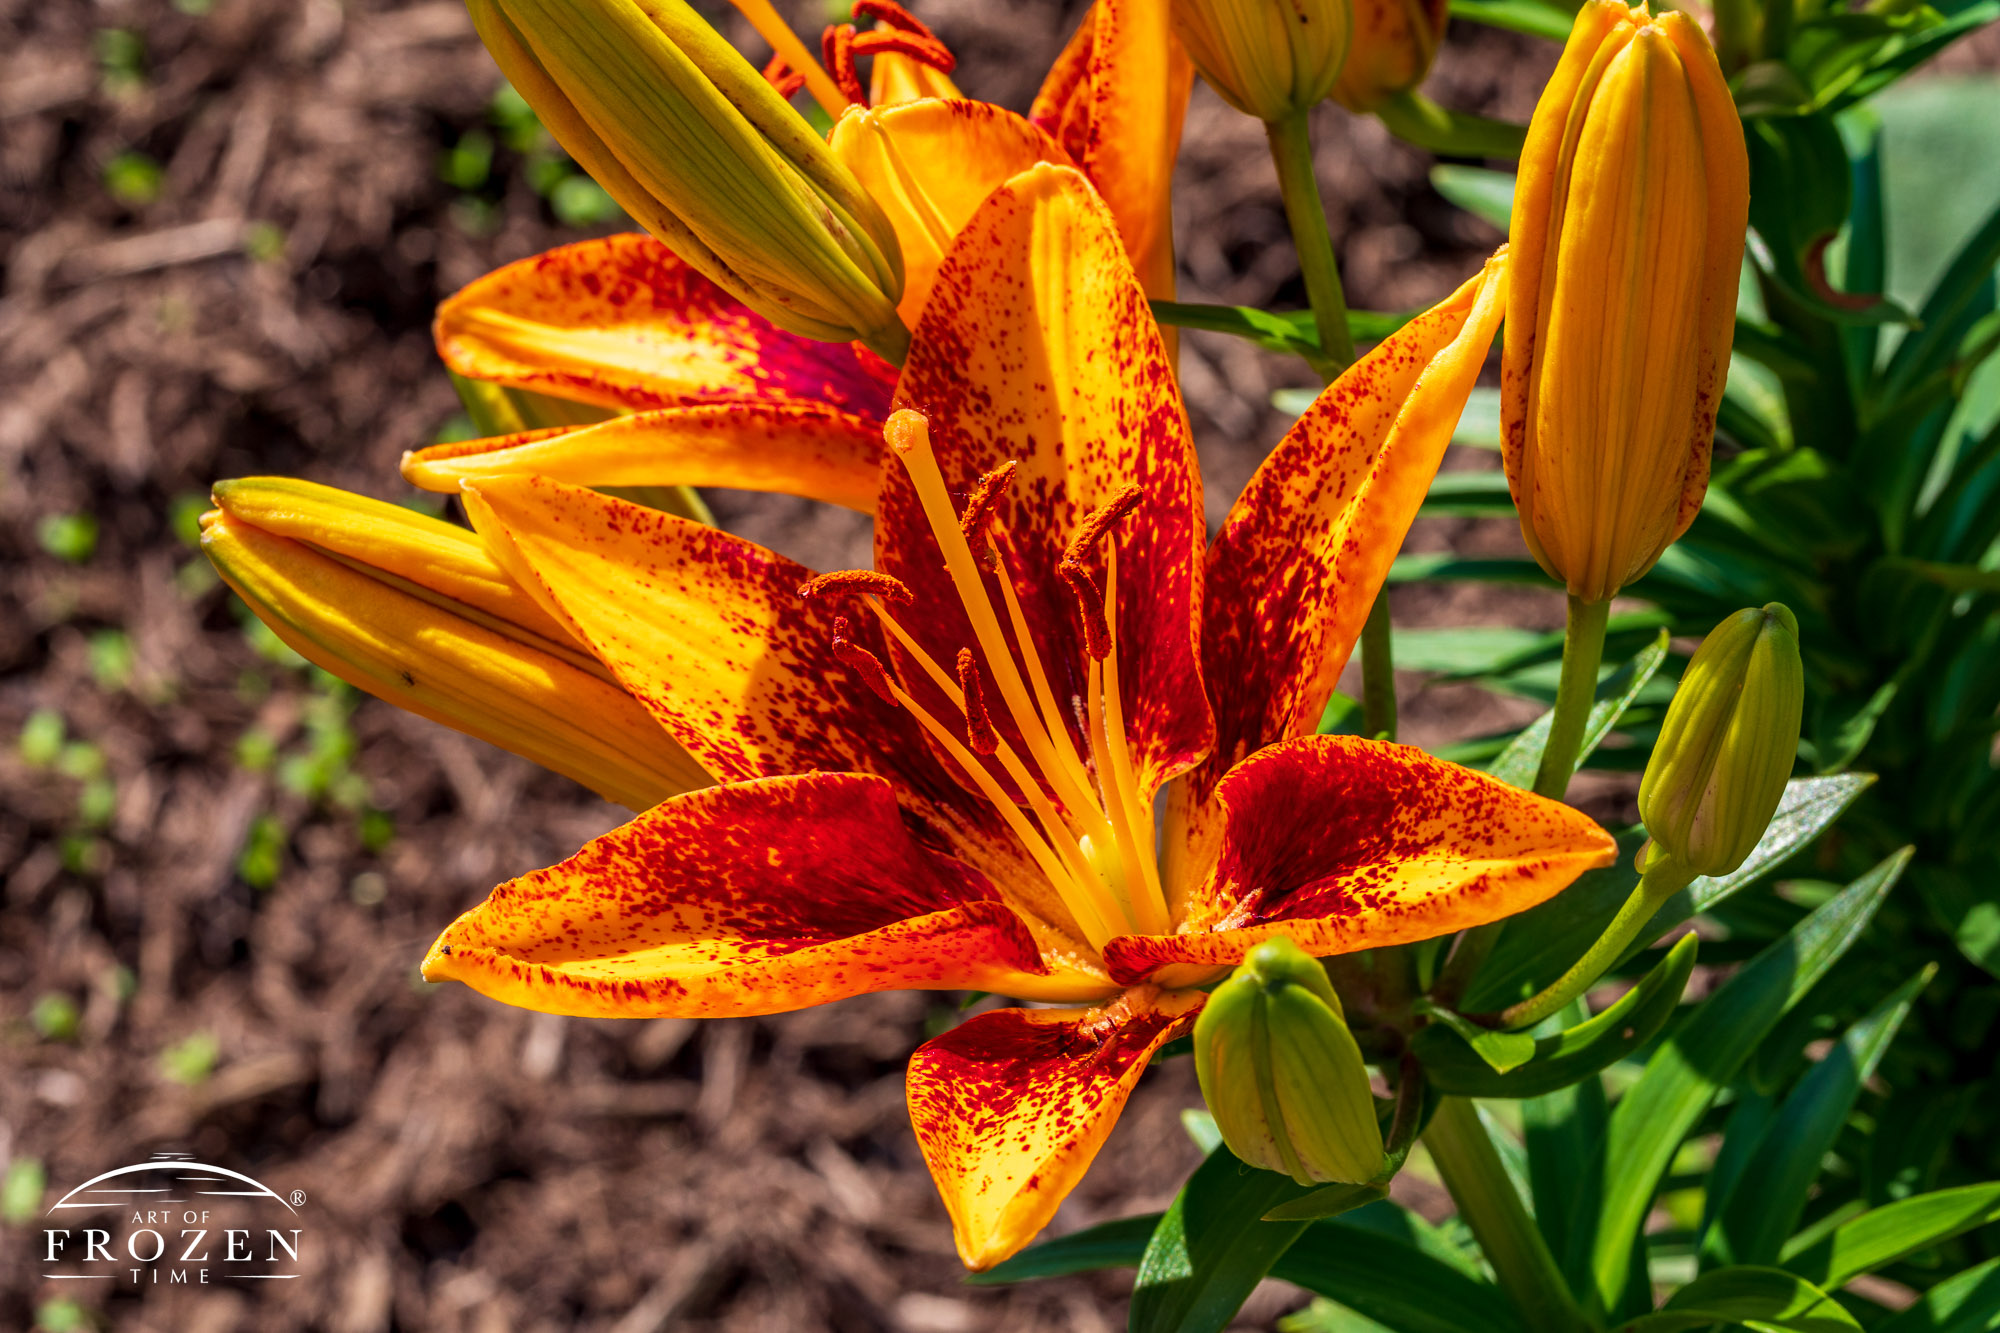 An Asiatic Lily with yellow petals and red center